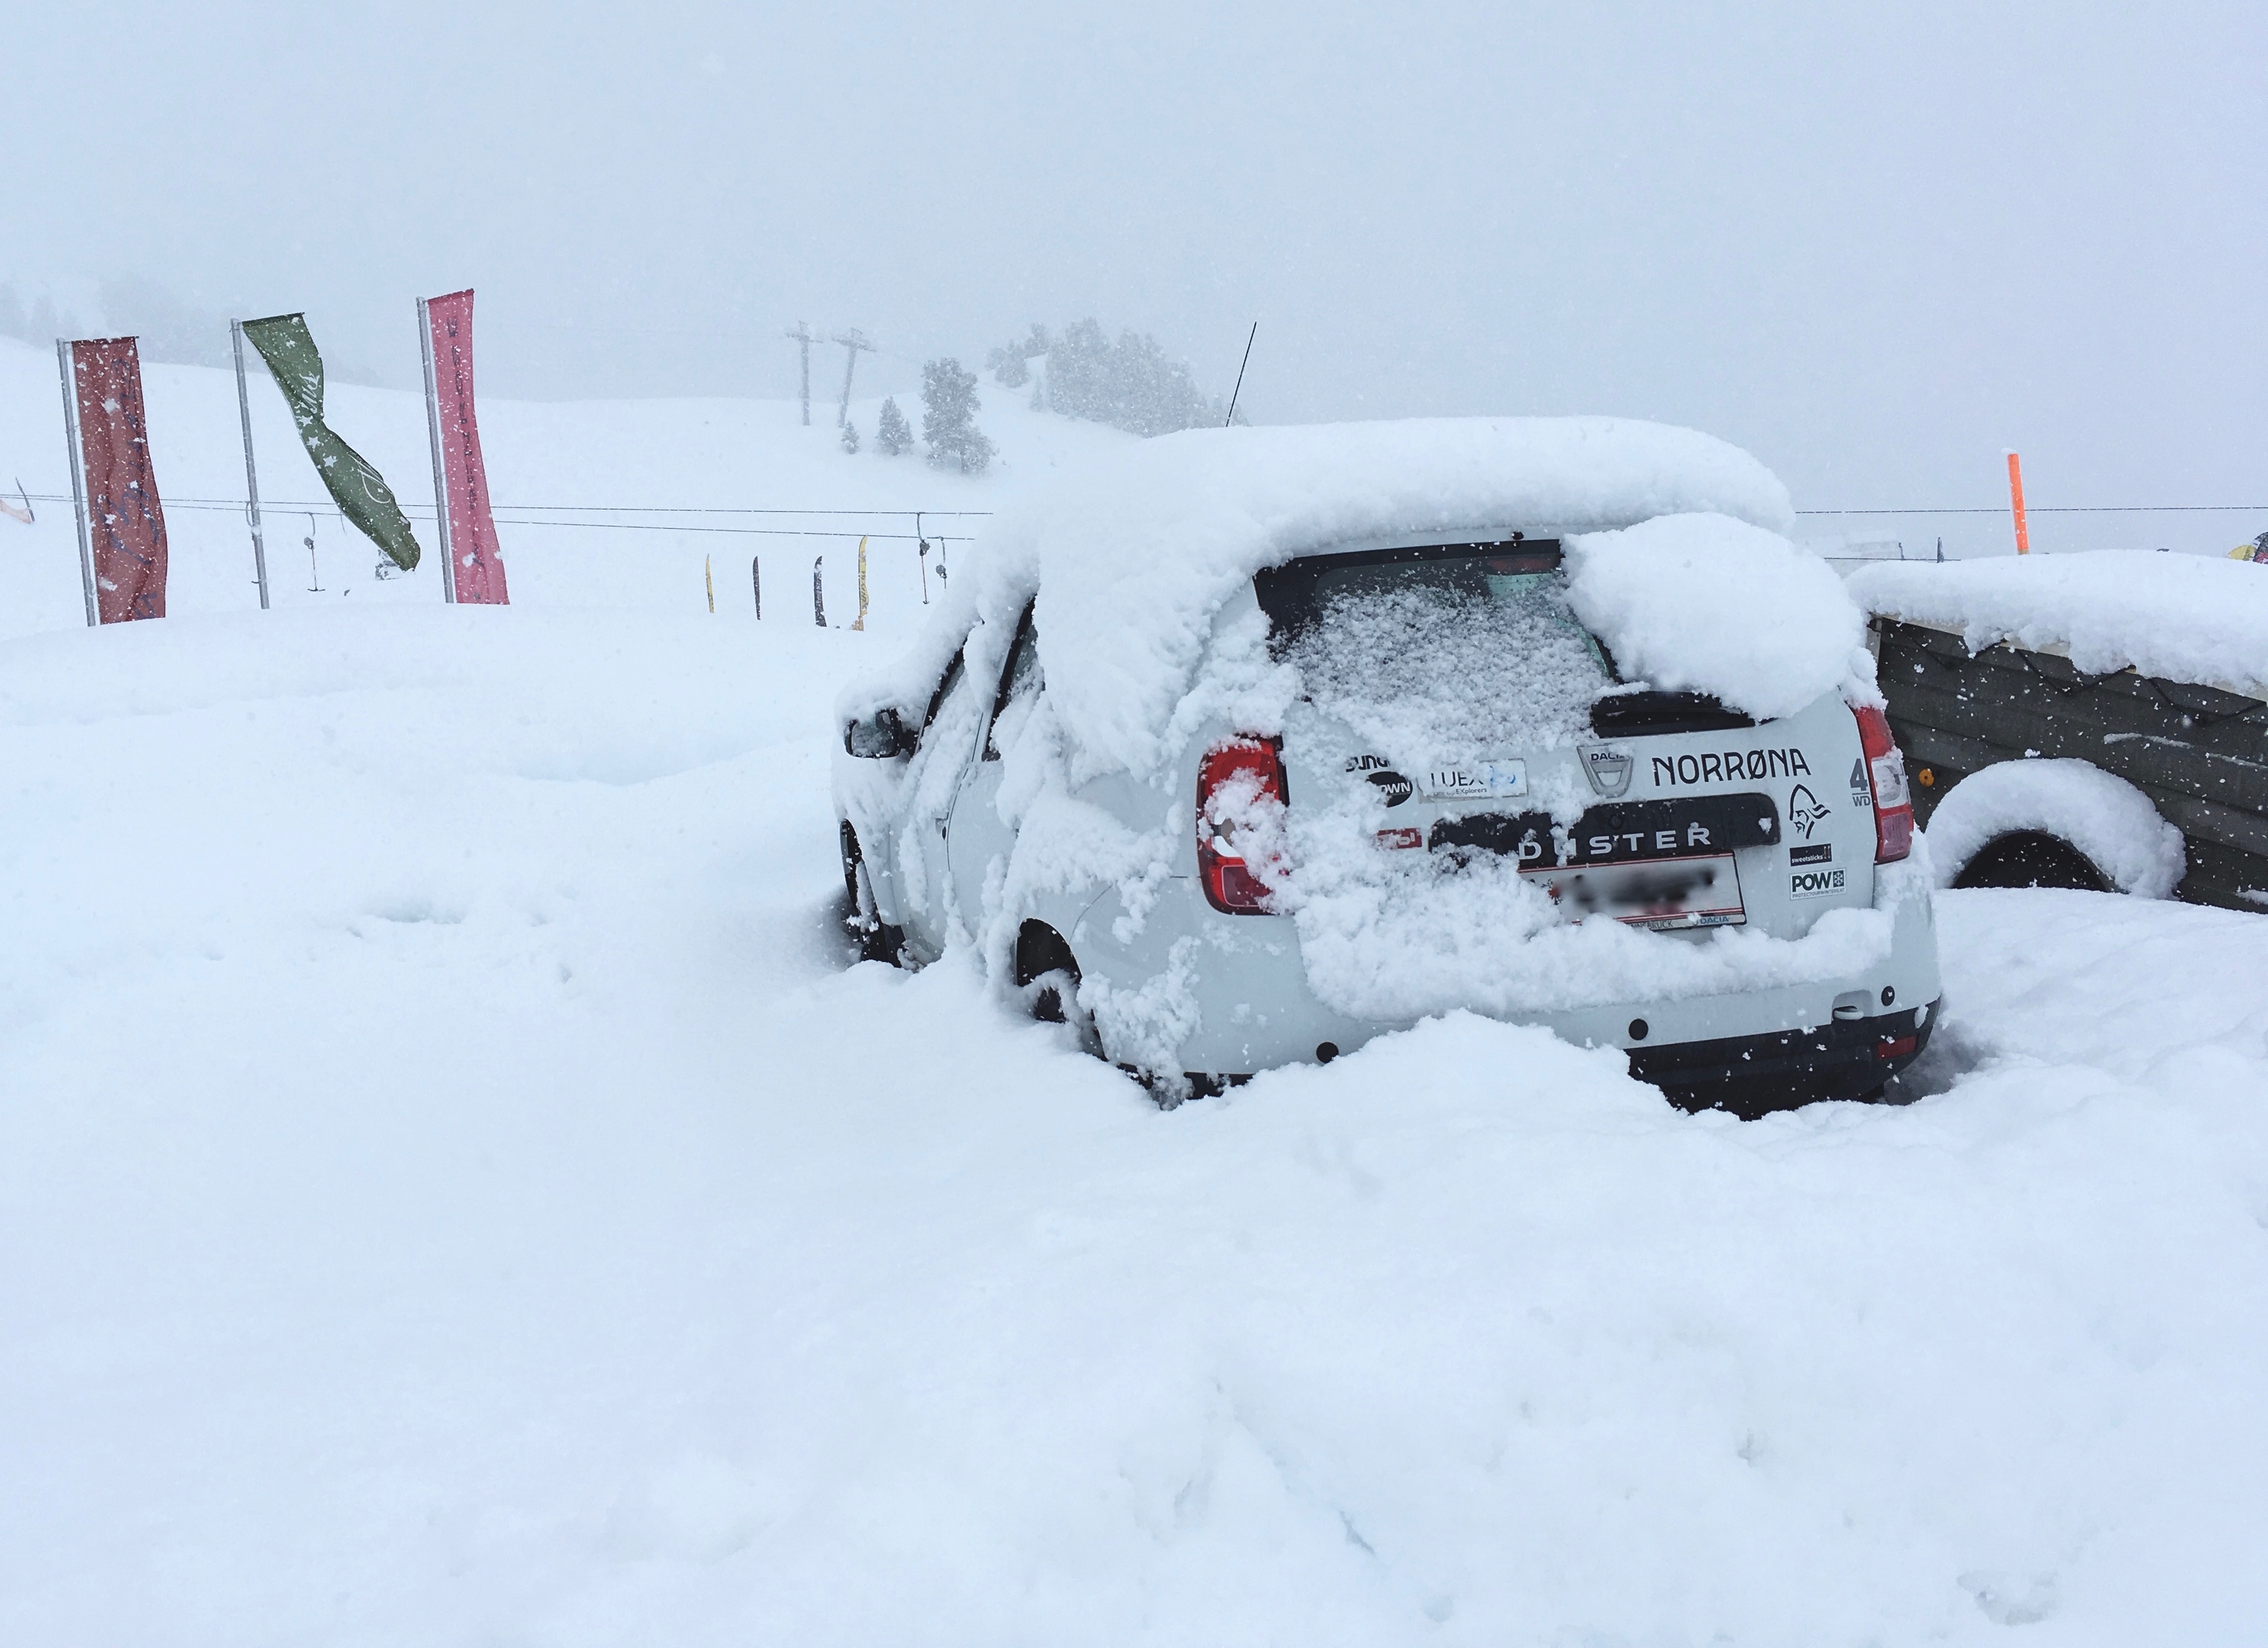 Heavy snow in Kühtai caused chaos on the last day of the ski test this year, but the Fall-Line #AdventureMobile soldiered on!